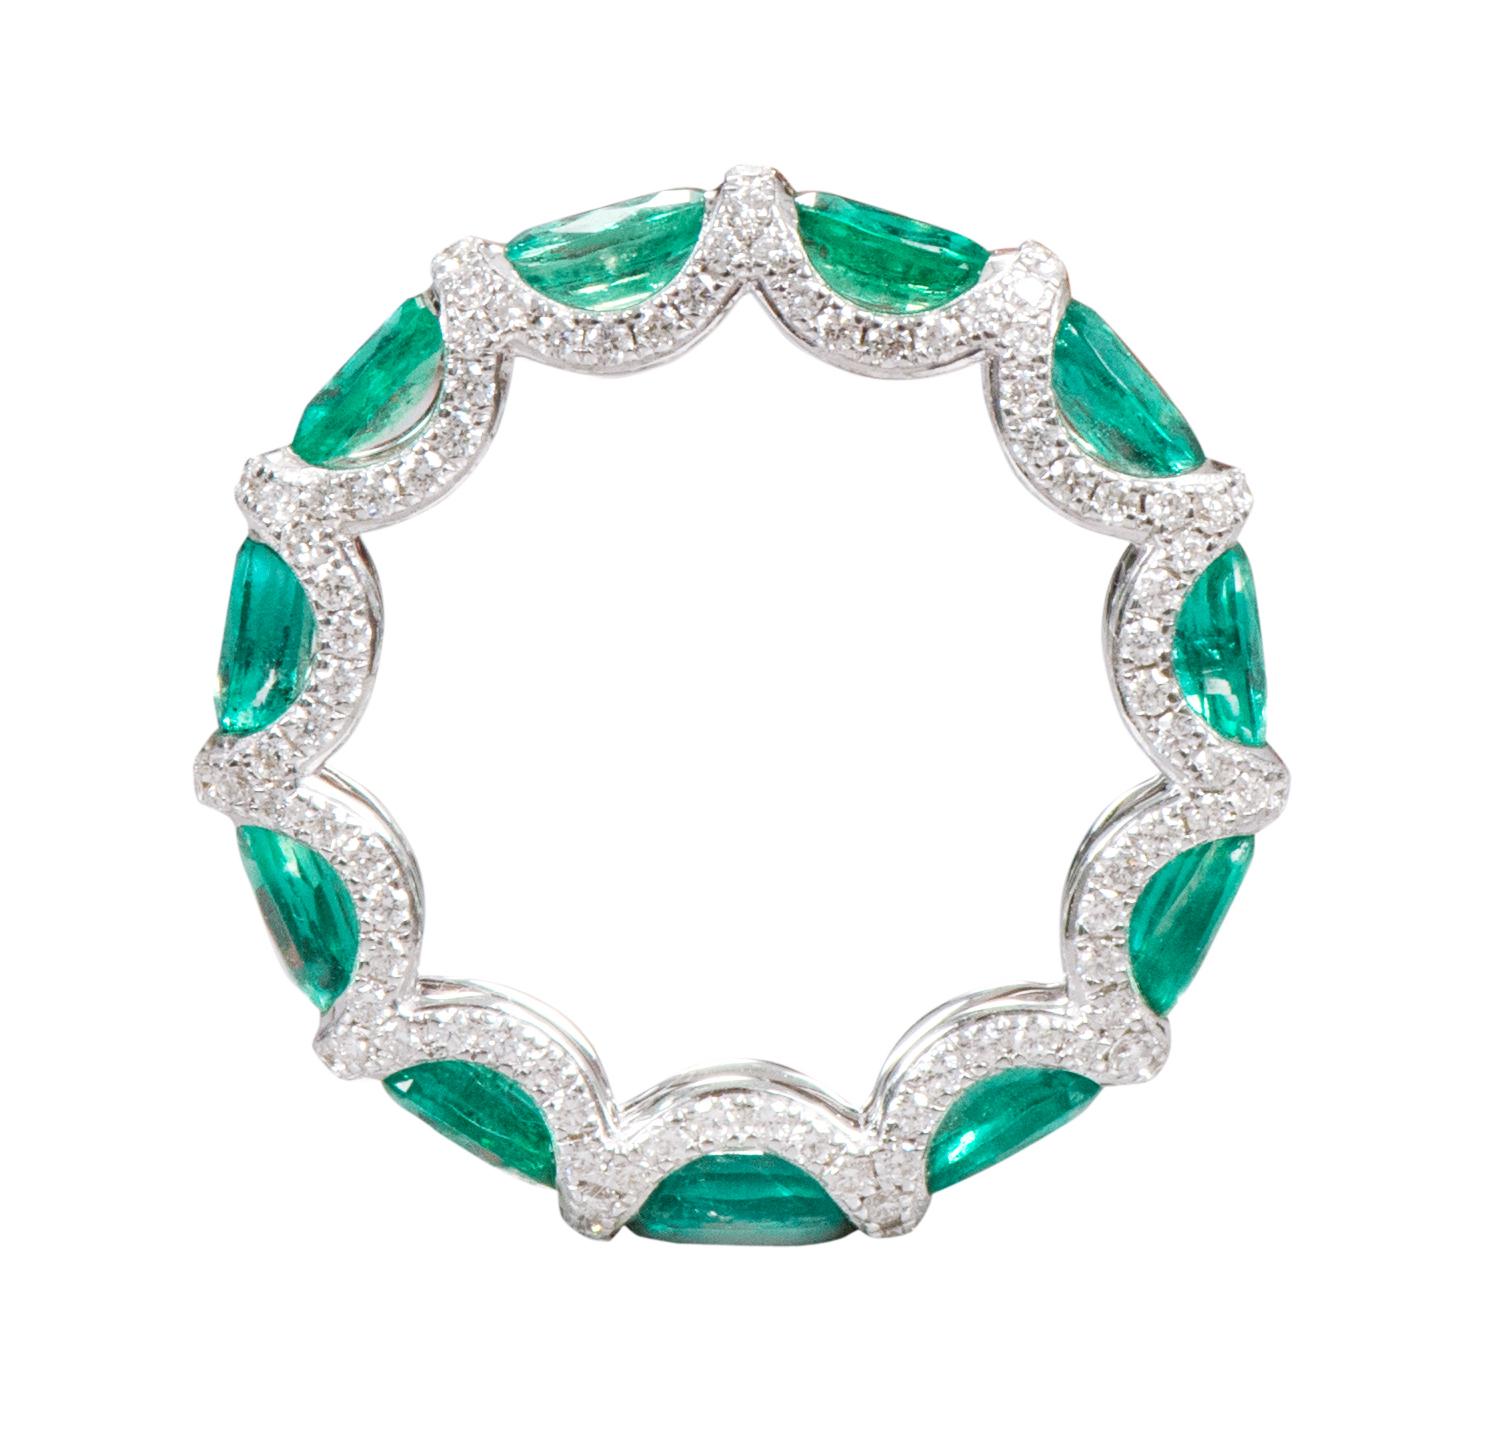 18 Karat White Gold 5.11 Carat Natural Emerald and Diamond Eternity Band Ring For Sale 1